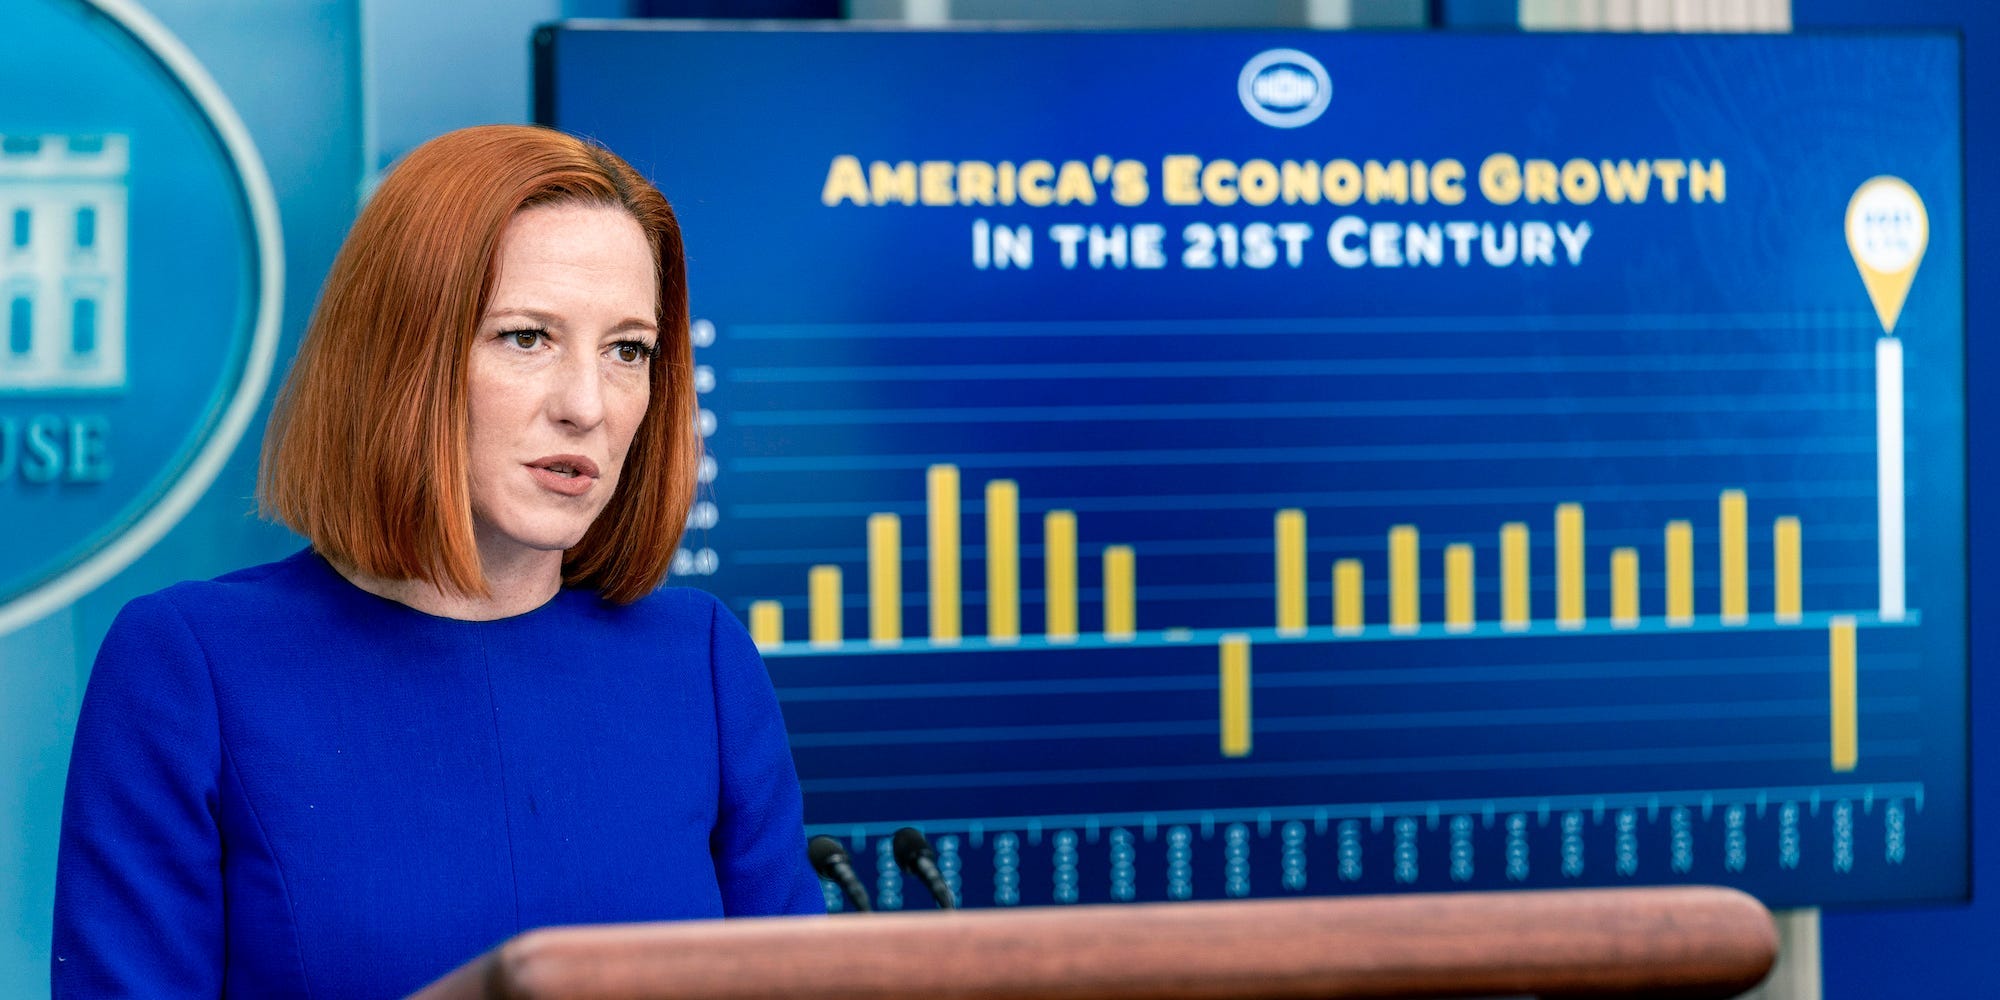 A monitor displays a graph showing American economic growth in the 21st century as White House press secretary Jen Psaki speaks at a press briefing at the White House in Washington, Thursday, Jan. 27, 2022.